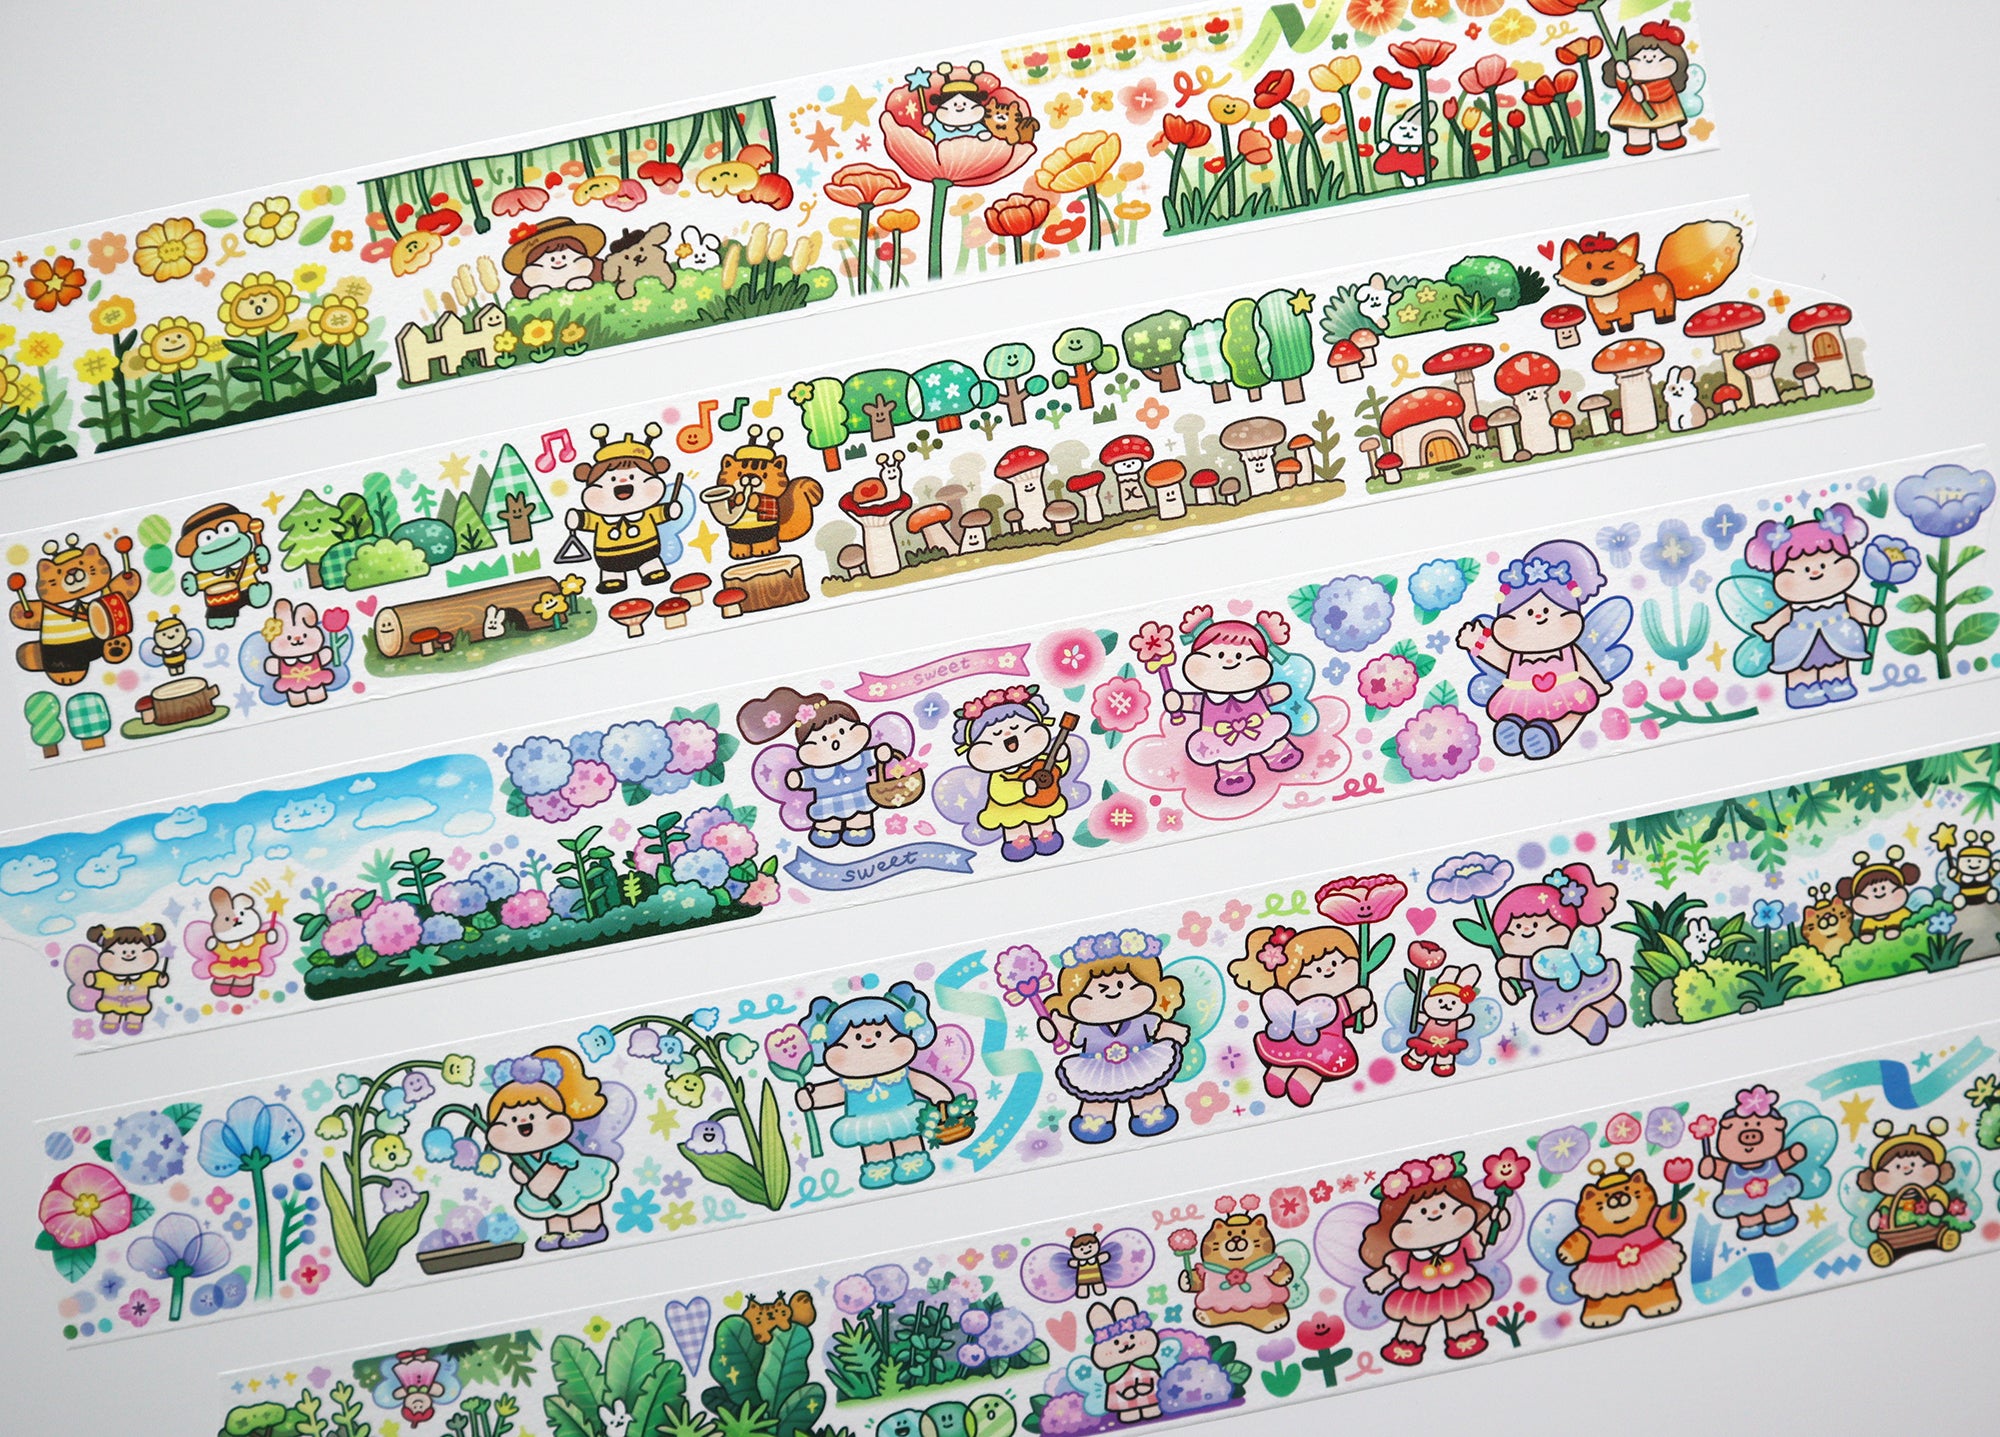 Meatball Washi Tape: Flower Patch